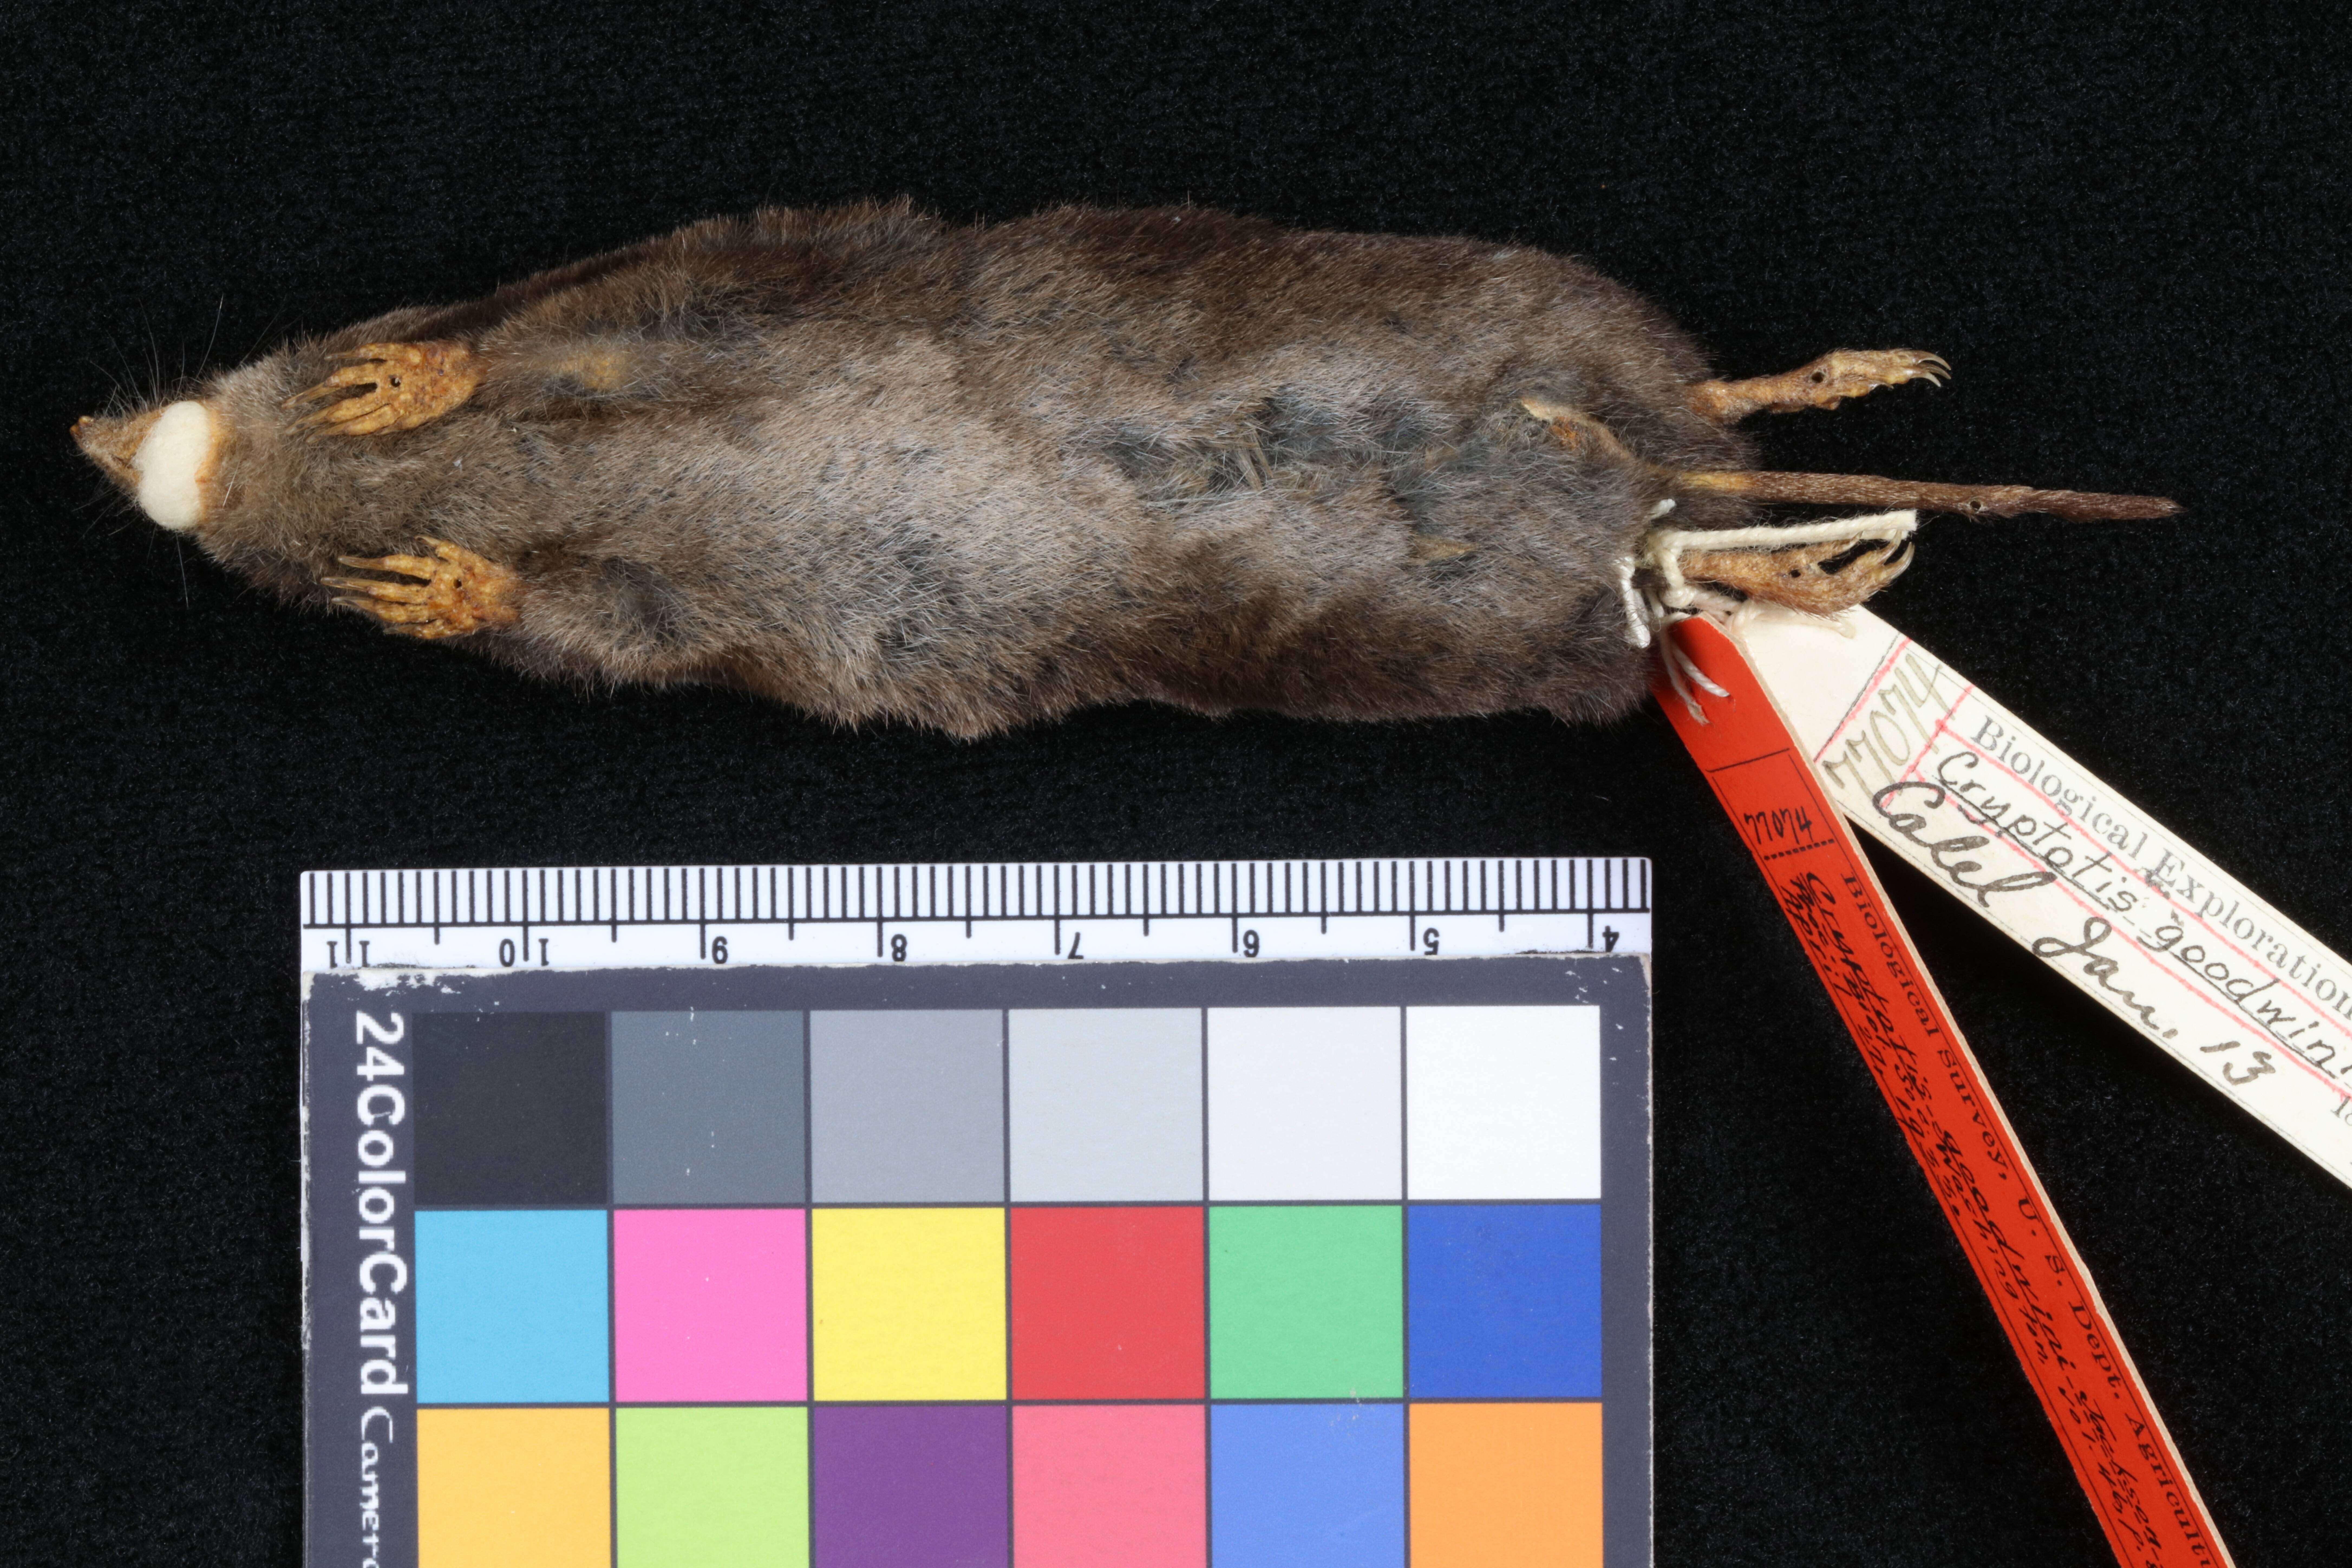 Image of Goodwin's small-eared shrew